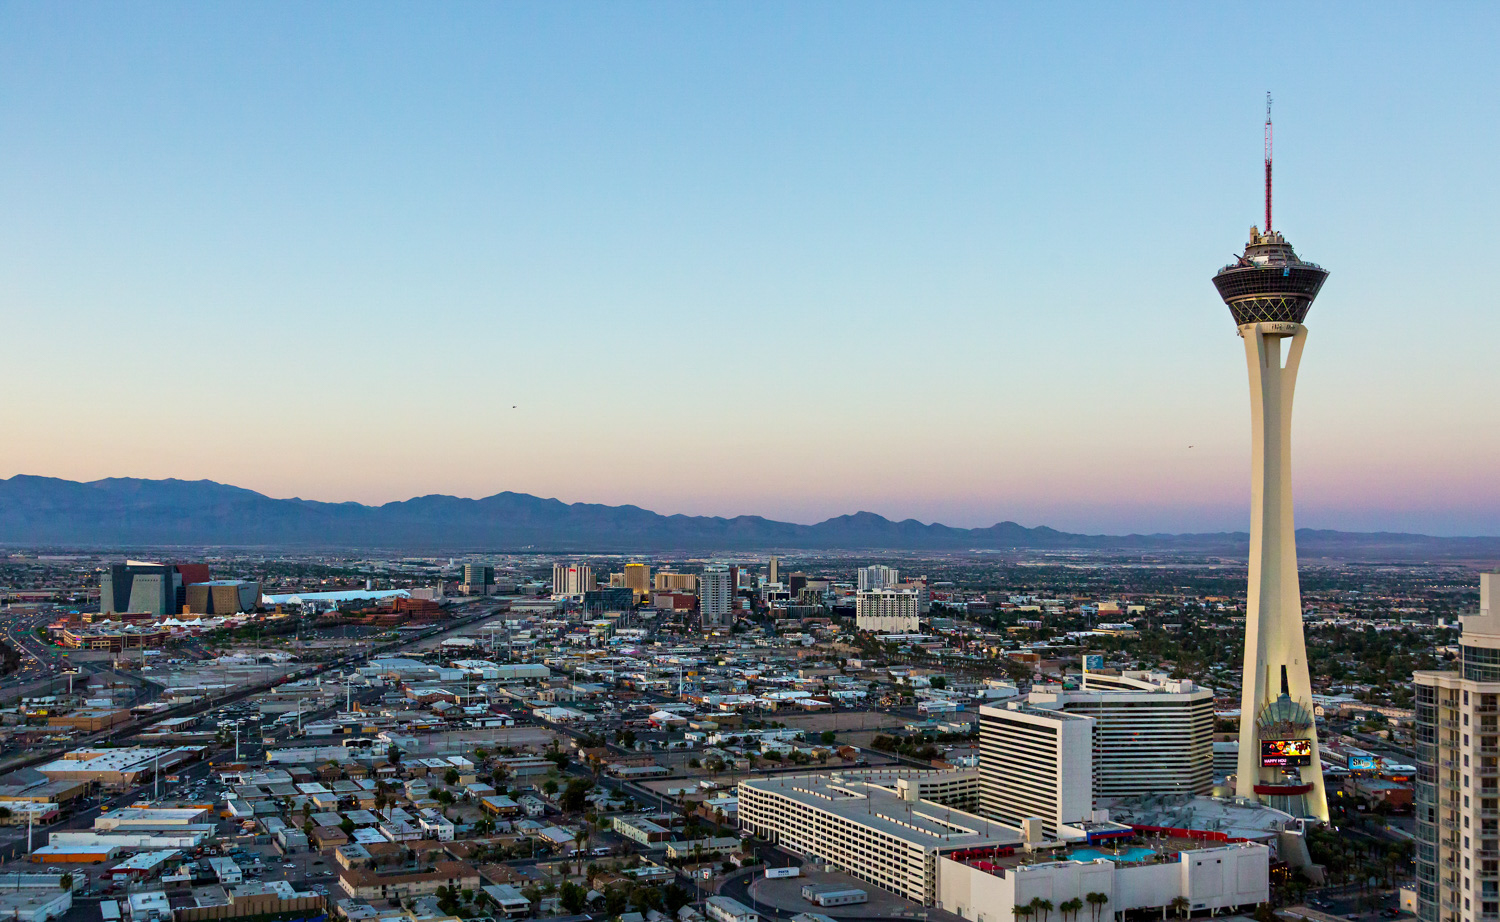 byron-mason-photography_commercial-aerial_las-vegas-strip_stratosphere-01-1500px